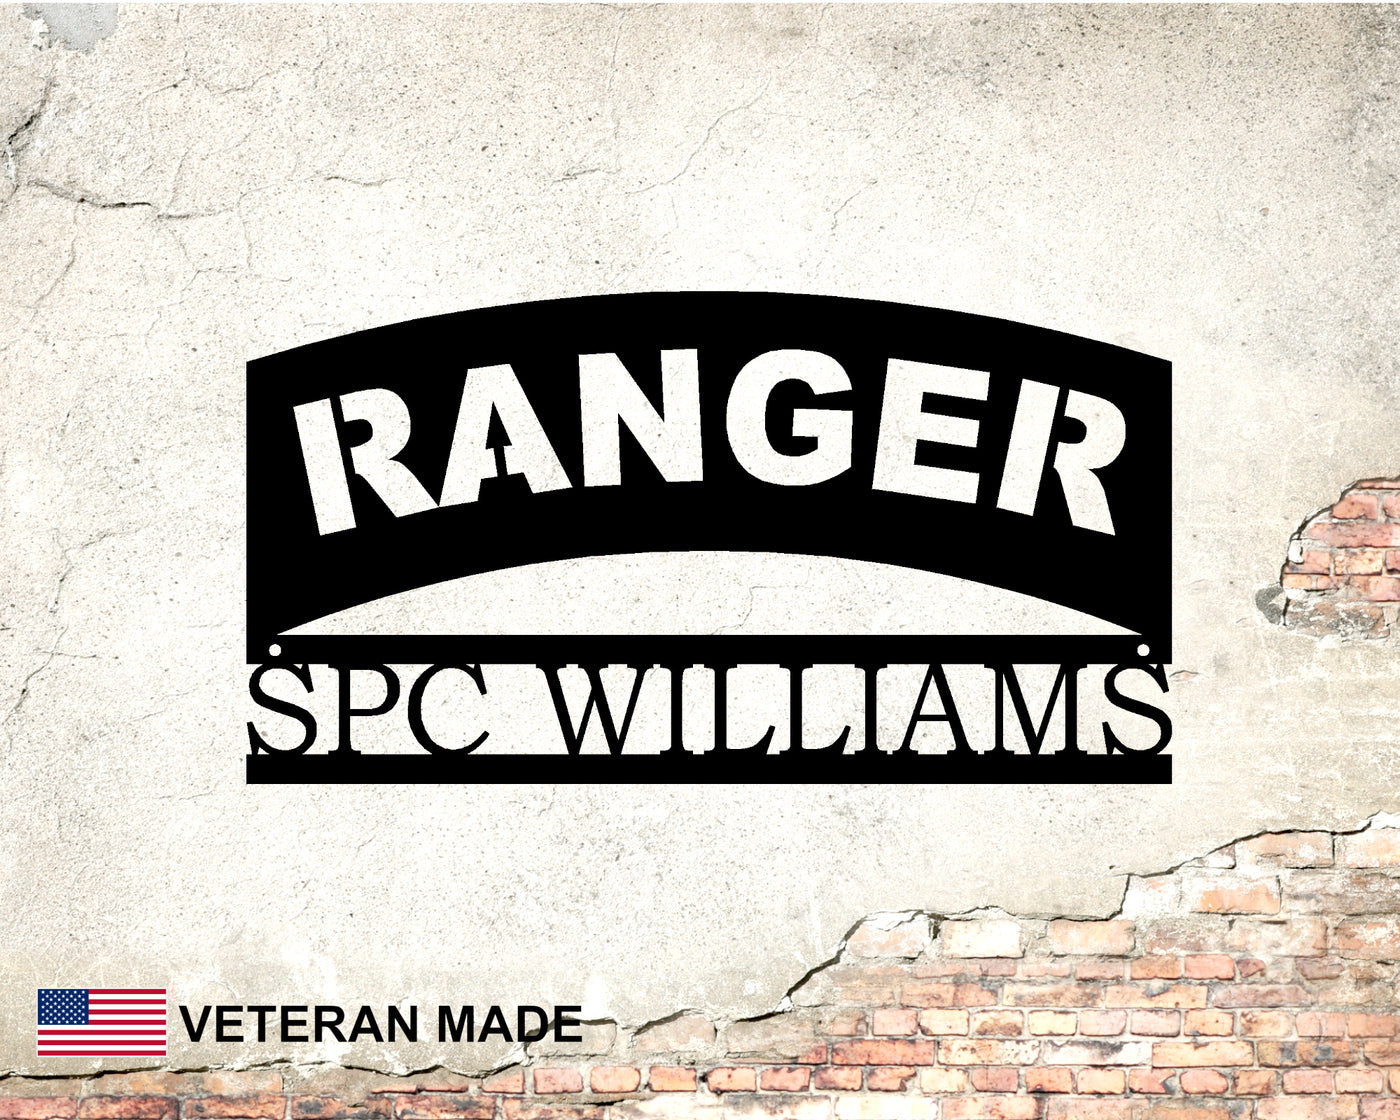 Personalized Ranger Metal Sign with Rank and Name - Madison Iron and Wood - Personalized sign - metal outdoor decor - Steel deocrations - american made products - veteran owned business products - fencing decorations - fencing supplies - custom wall decorations - personalized wall signs - steel - decorative post caps - steel post caps - metal post caps - brackets - structural brackets - home improvement - easter - easter decorations - easter gift - easter yard decor